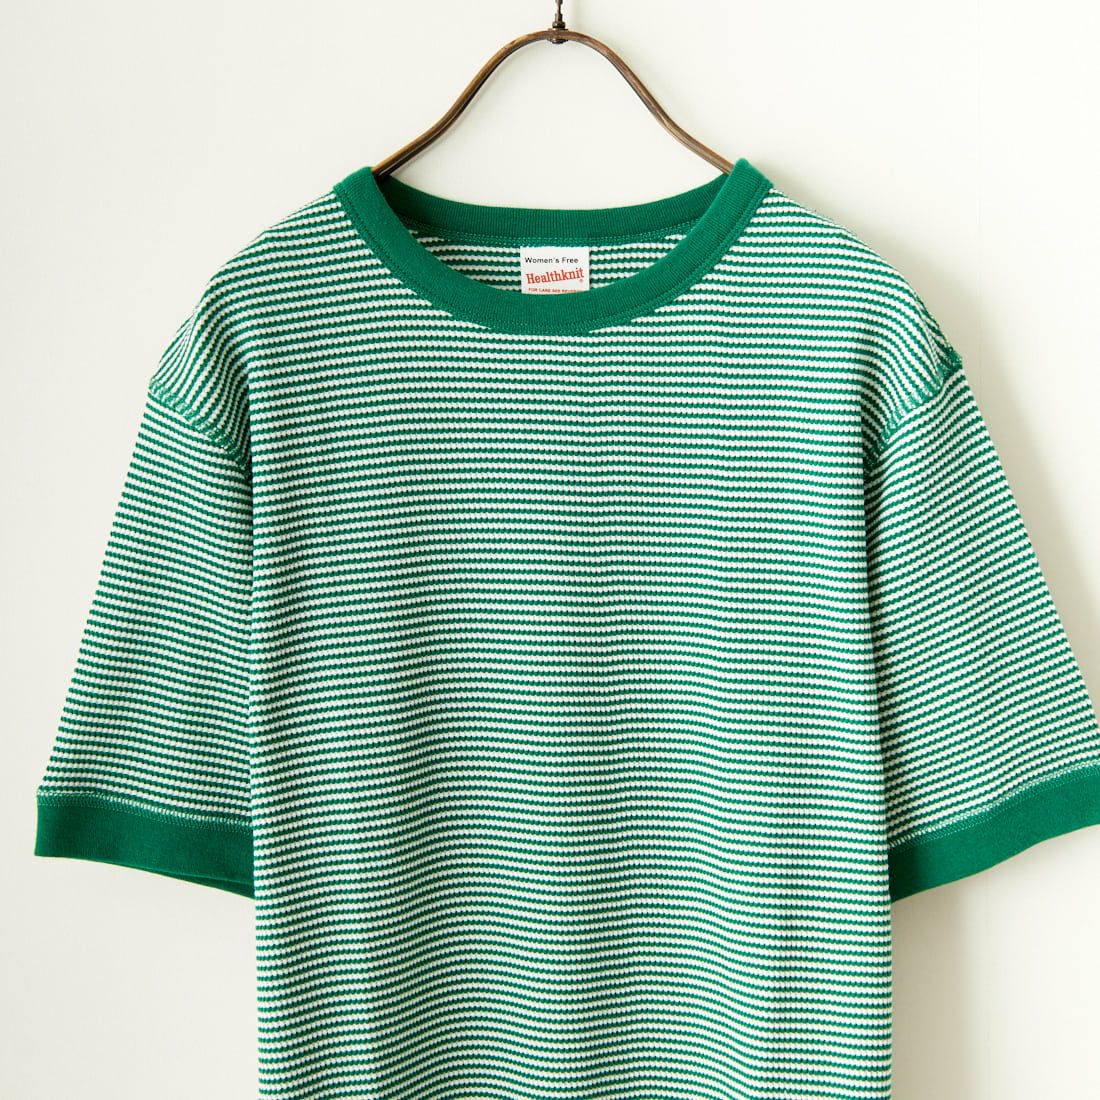 Health knit [ヘルスニット] 別注 ワッフルクルーネックTシャツ [HR24S-L022IN-JF]｜ジーンズファクトリー公式通販サイト  - JEANS FACTORY Online Shop